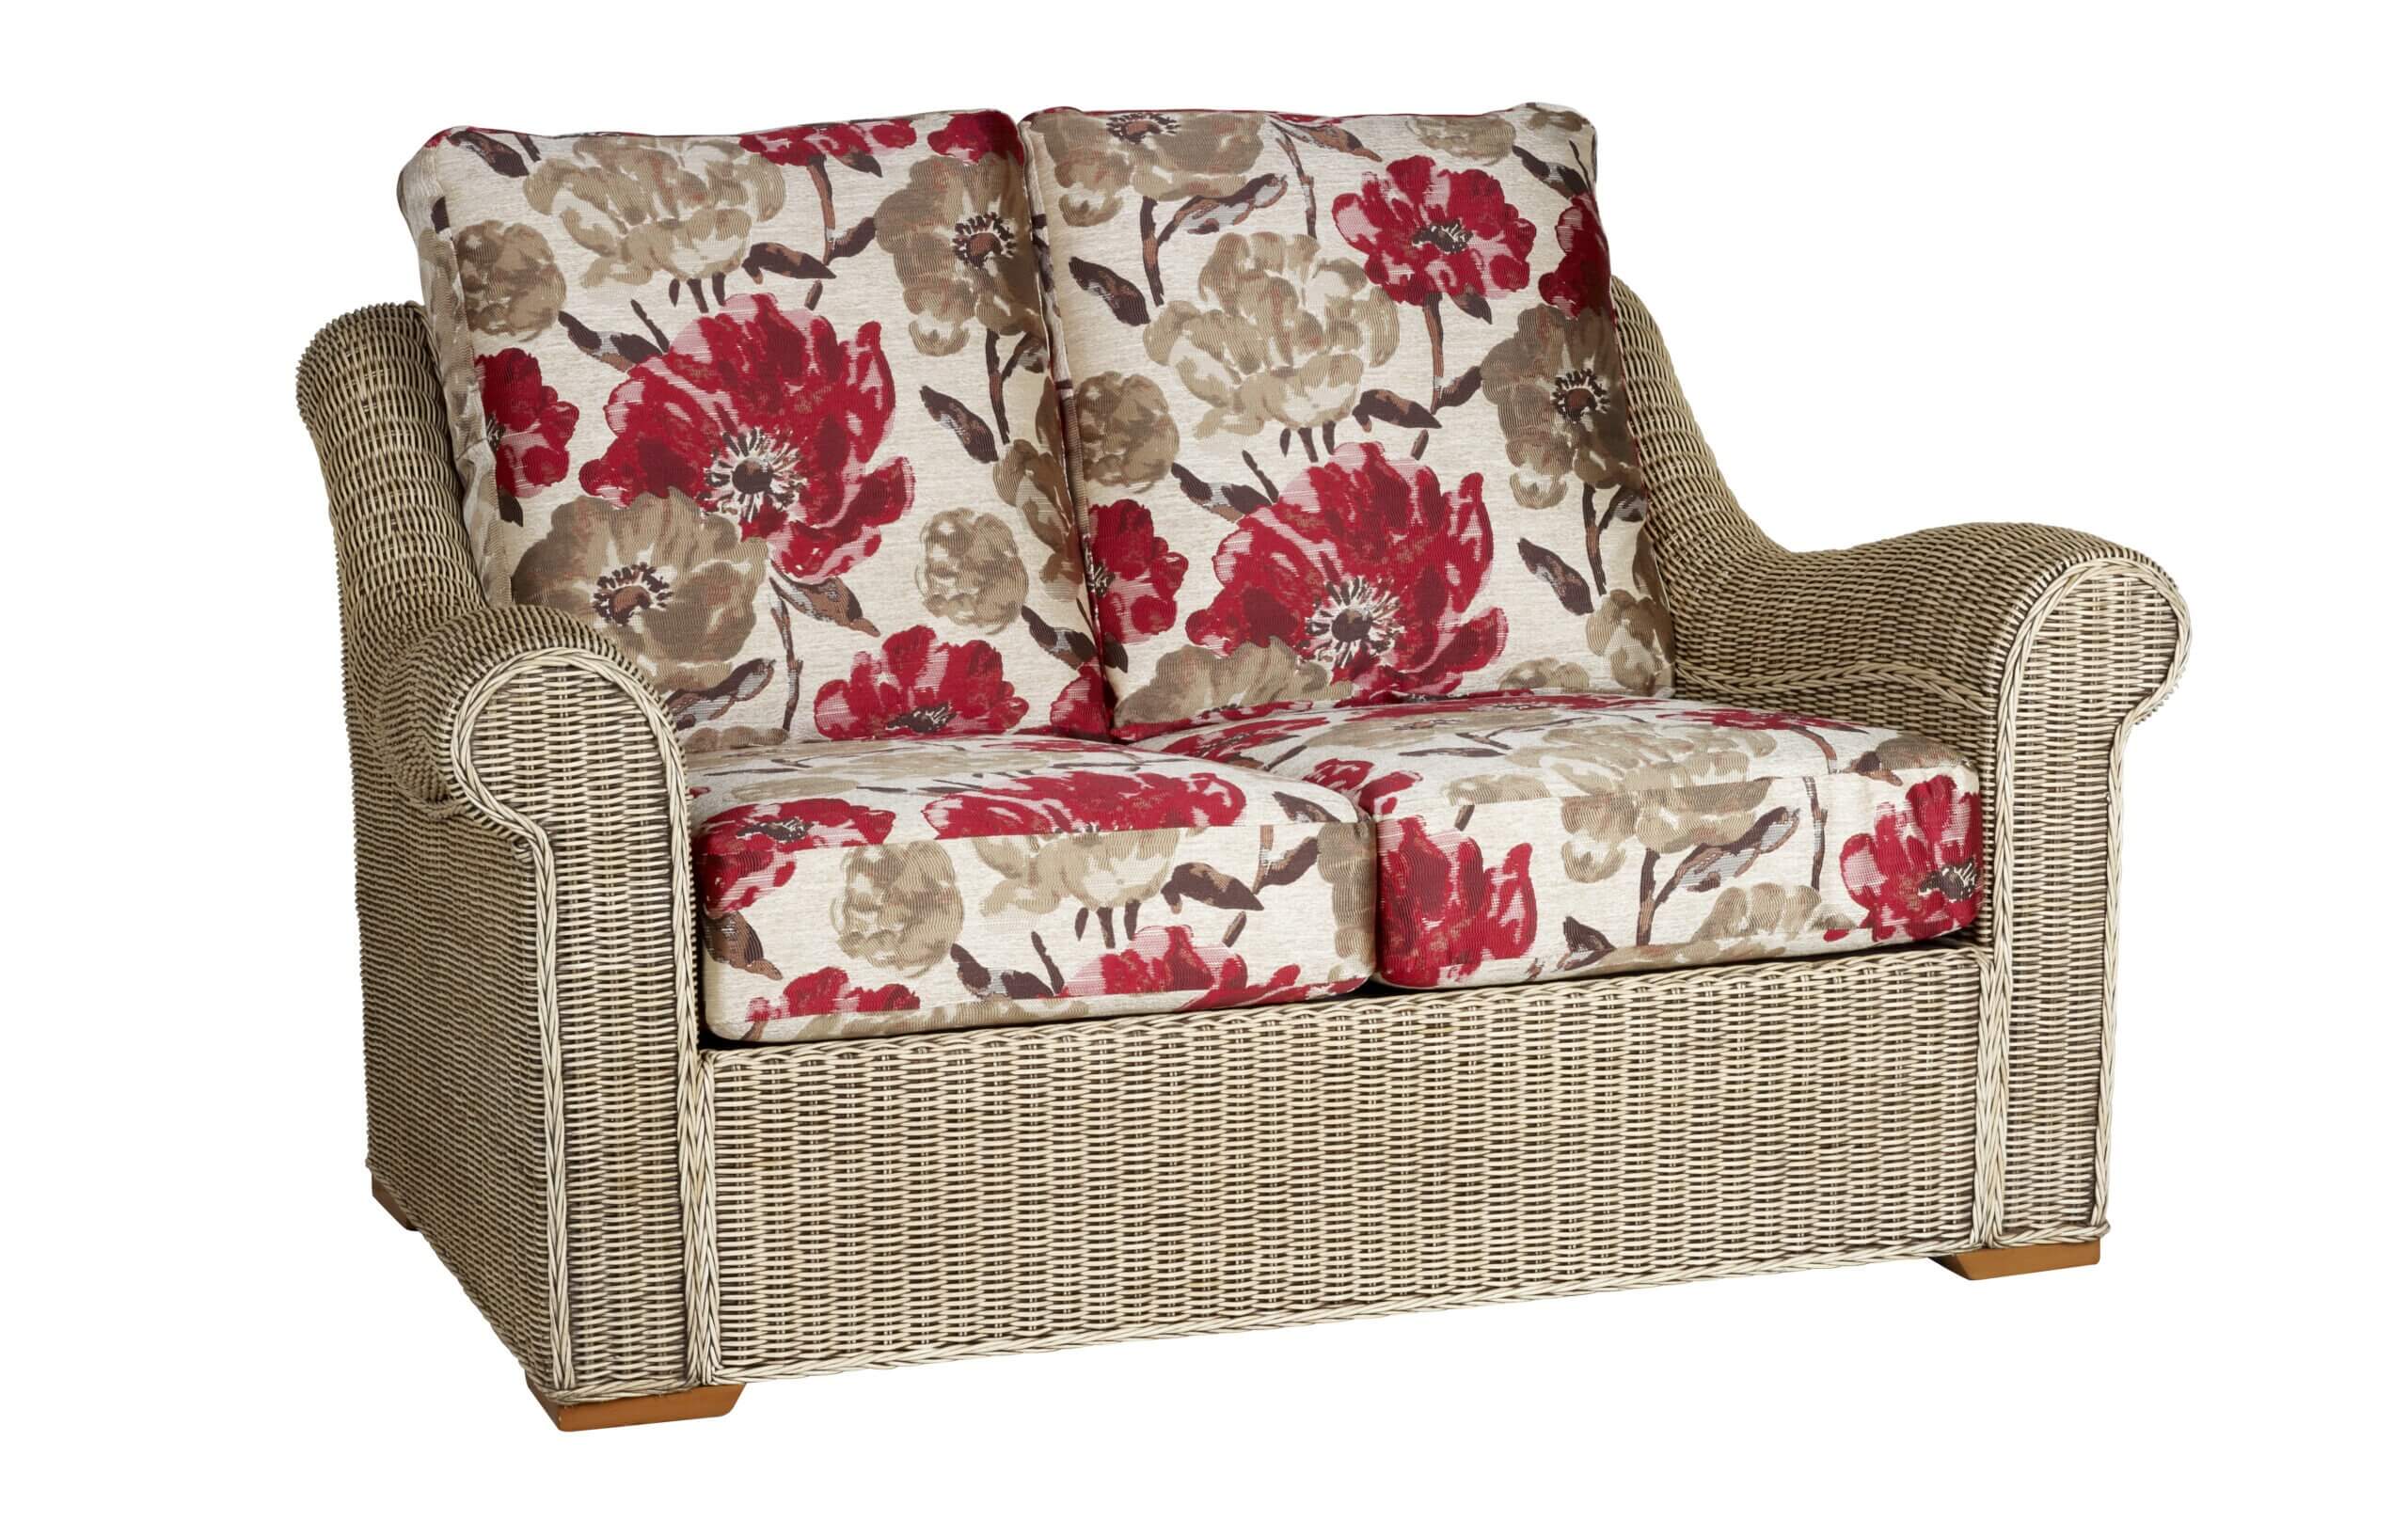 Showing image for Brando 2-seater sofa